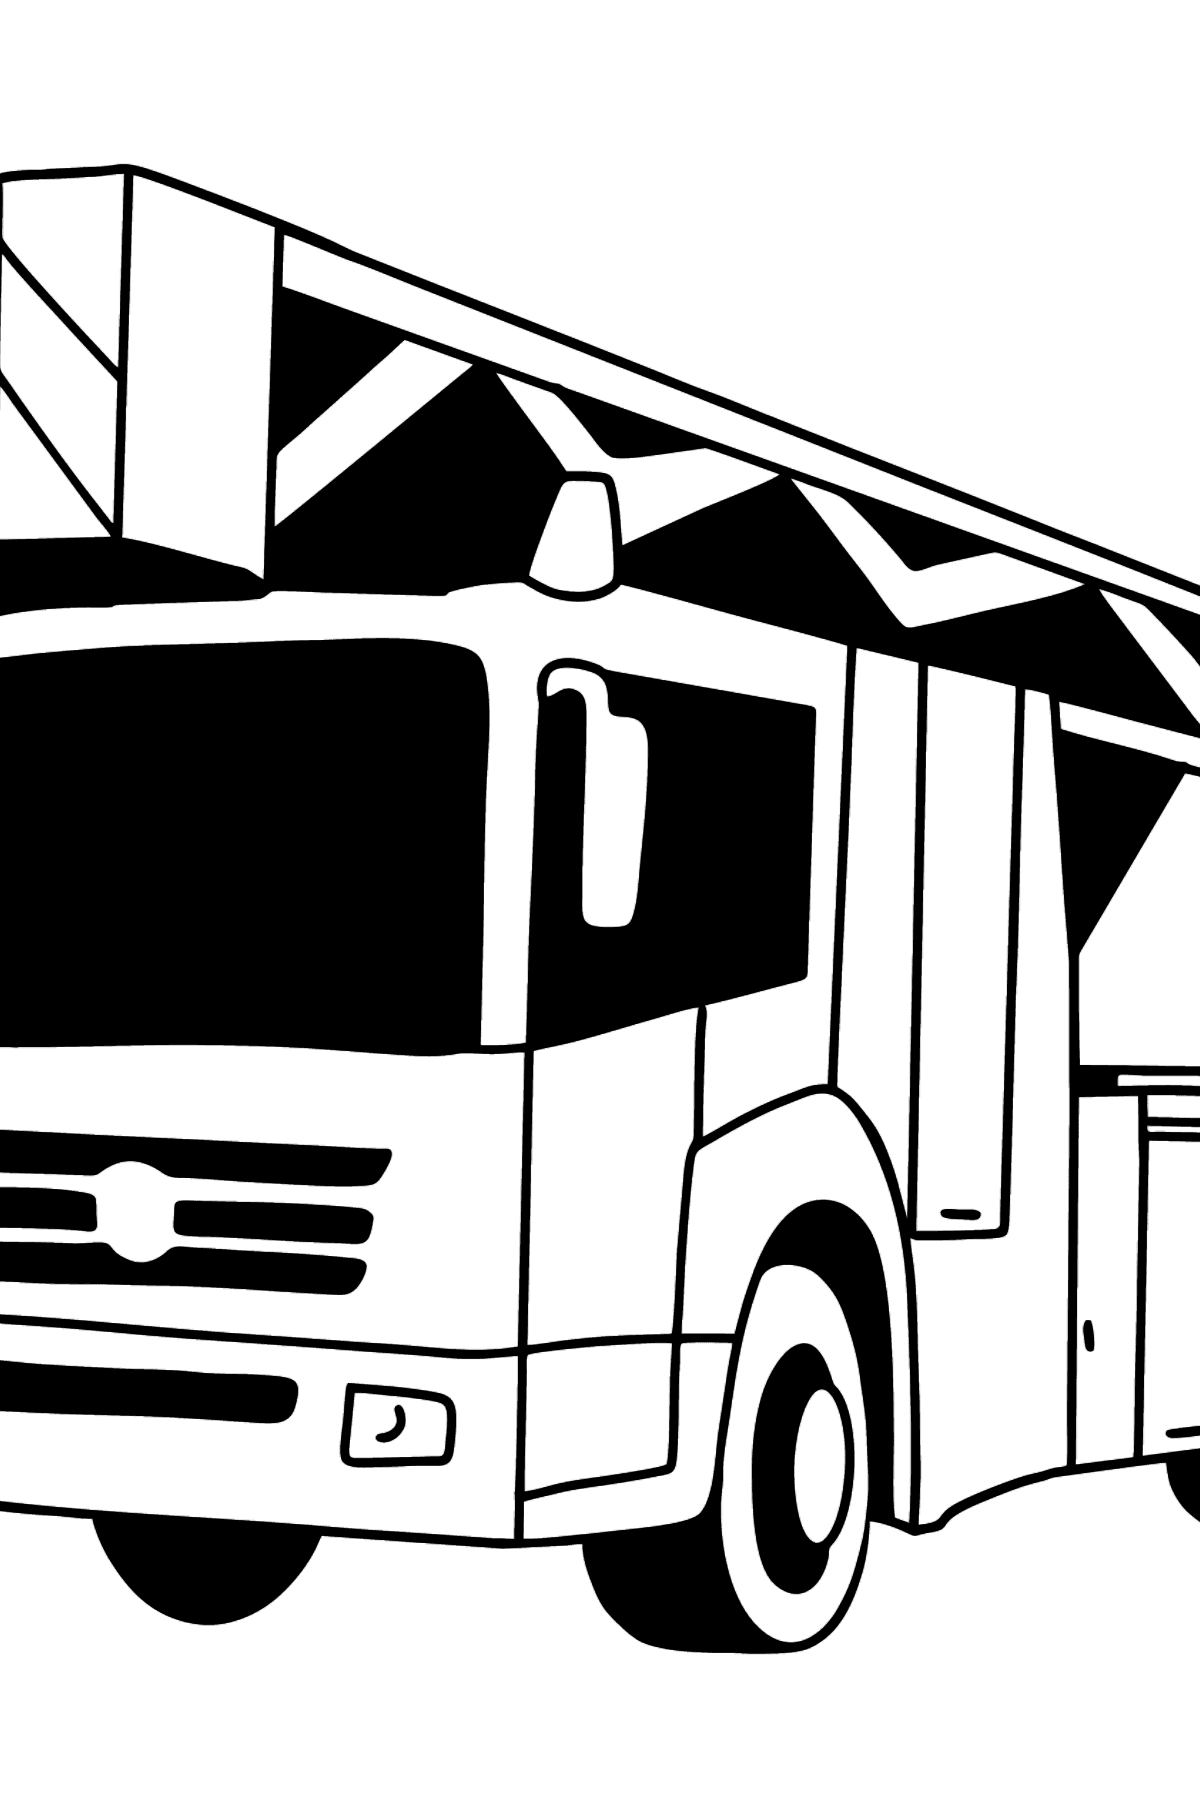 Fire Truck in Germany coloring page - Coloring Pages for Kids